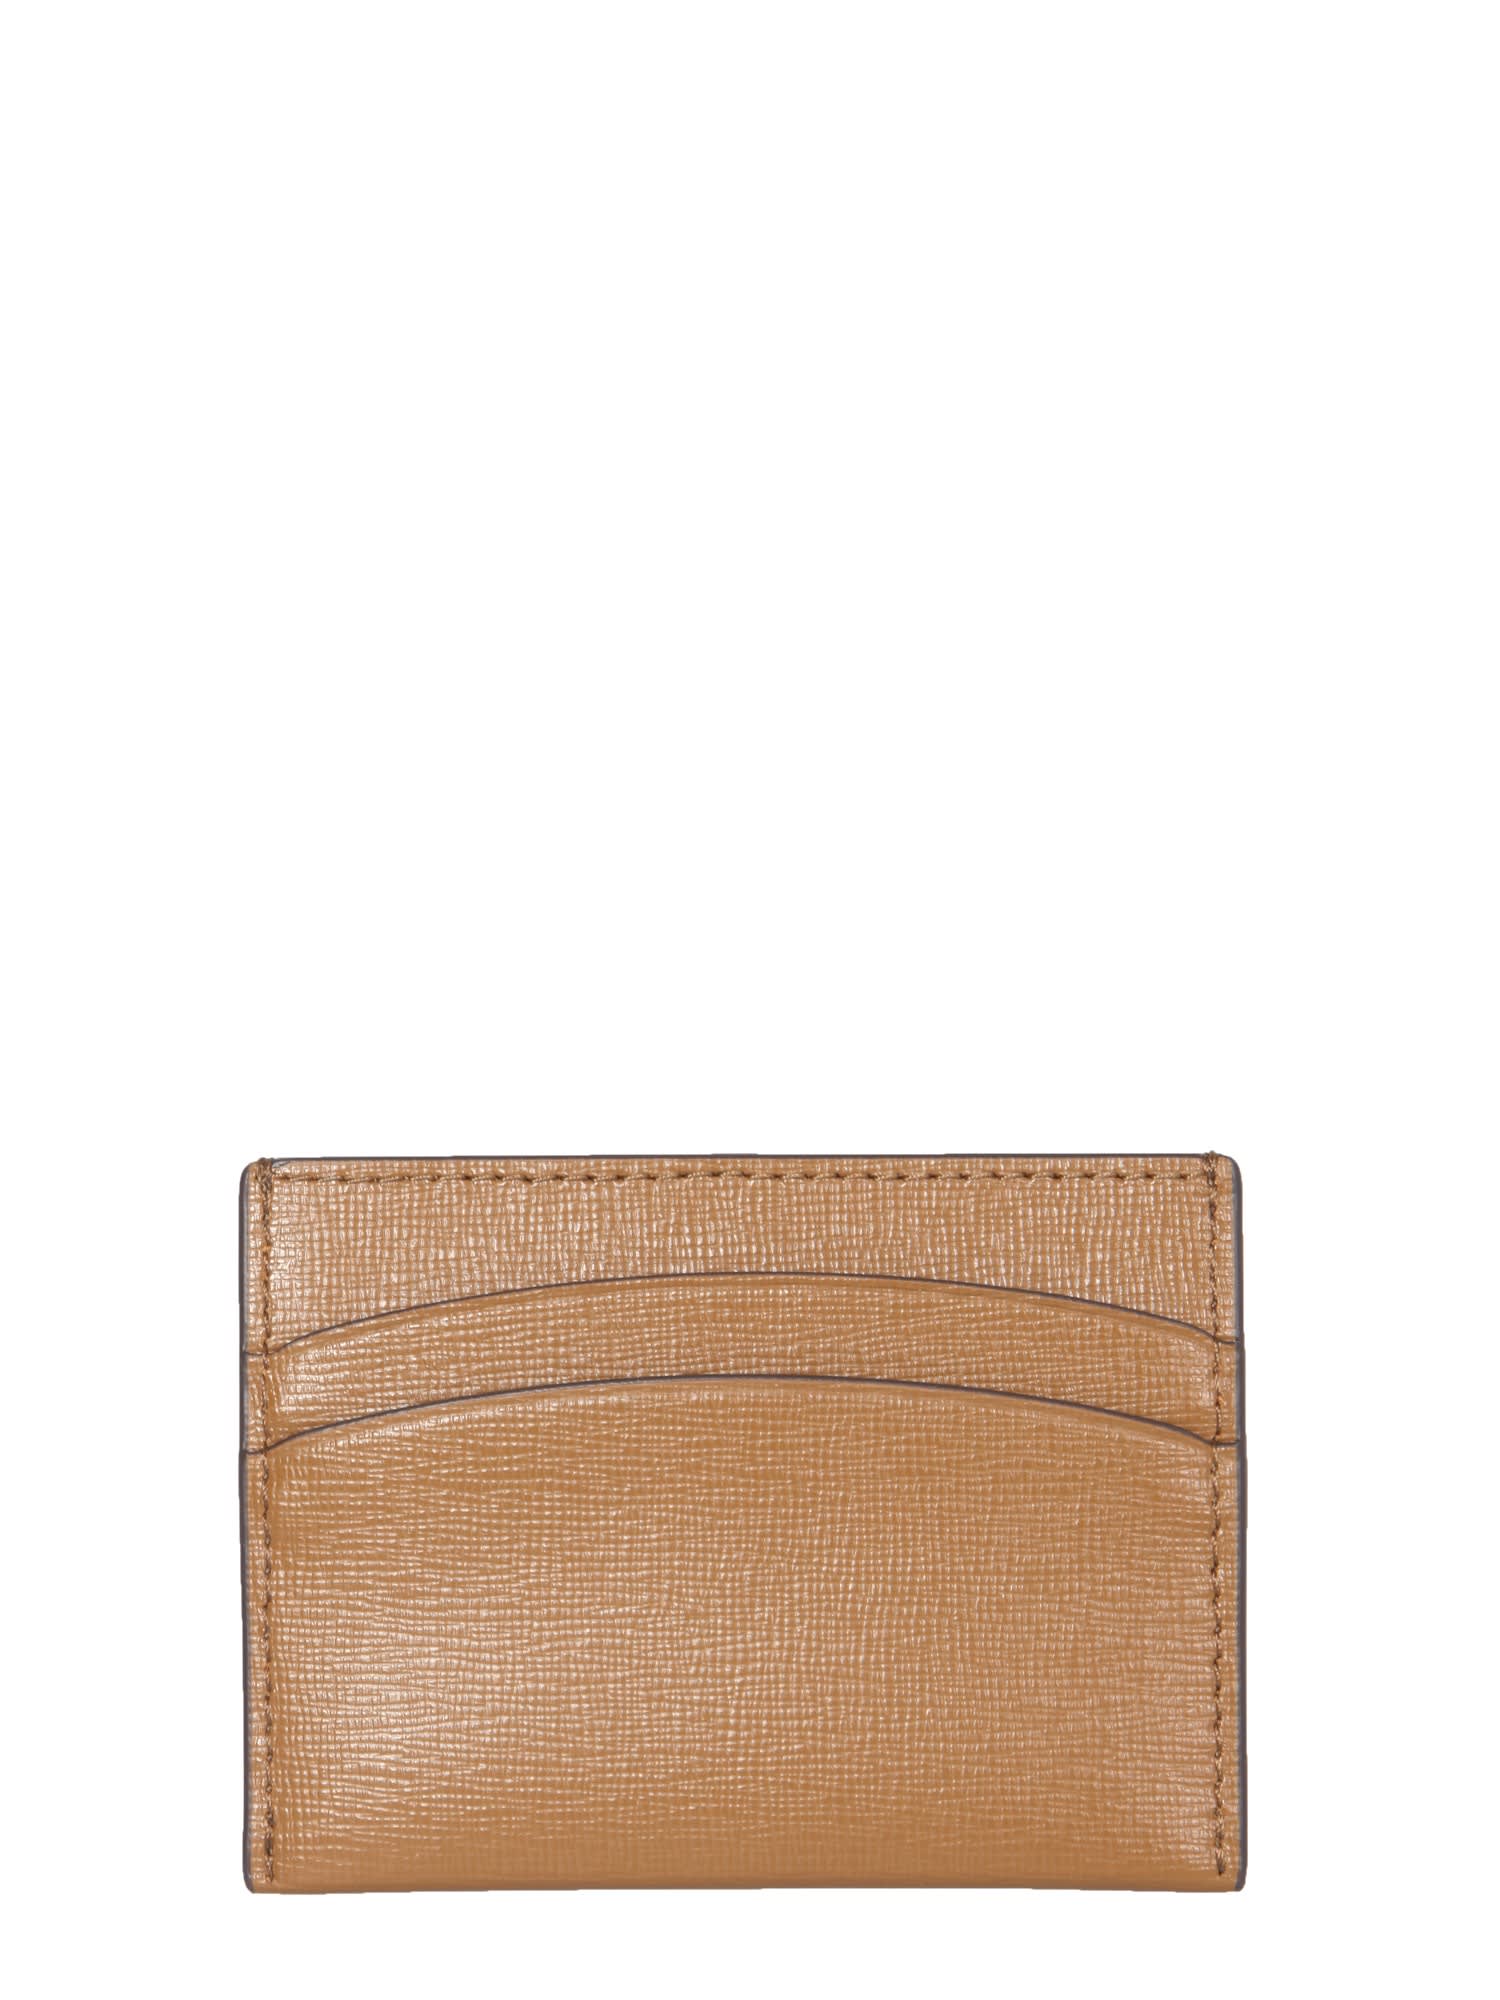 Tory Burch Robinson Card Holder In Bistro Brown | ModeSens